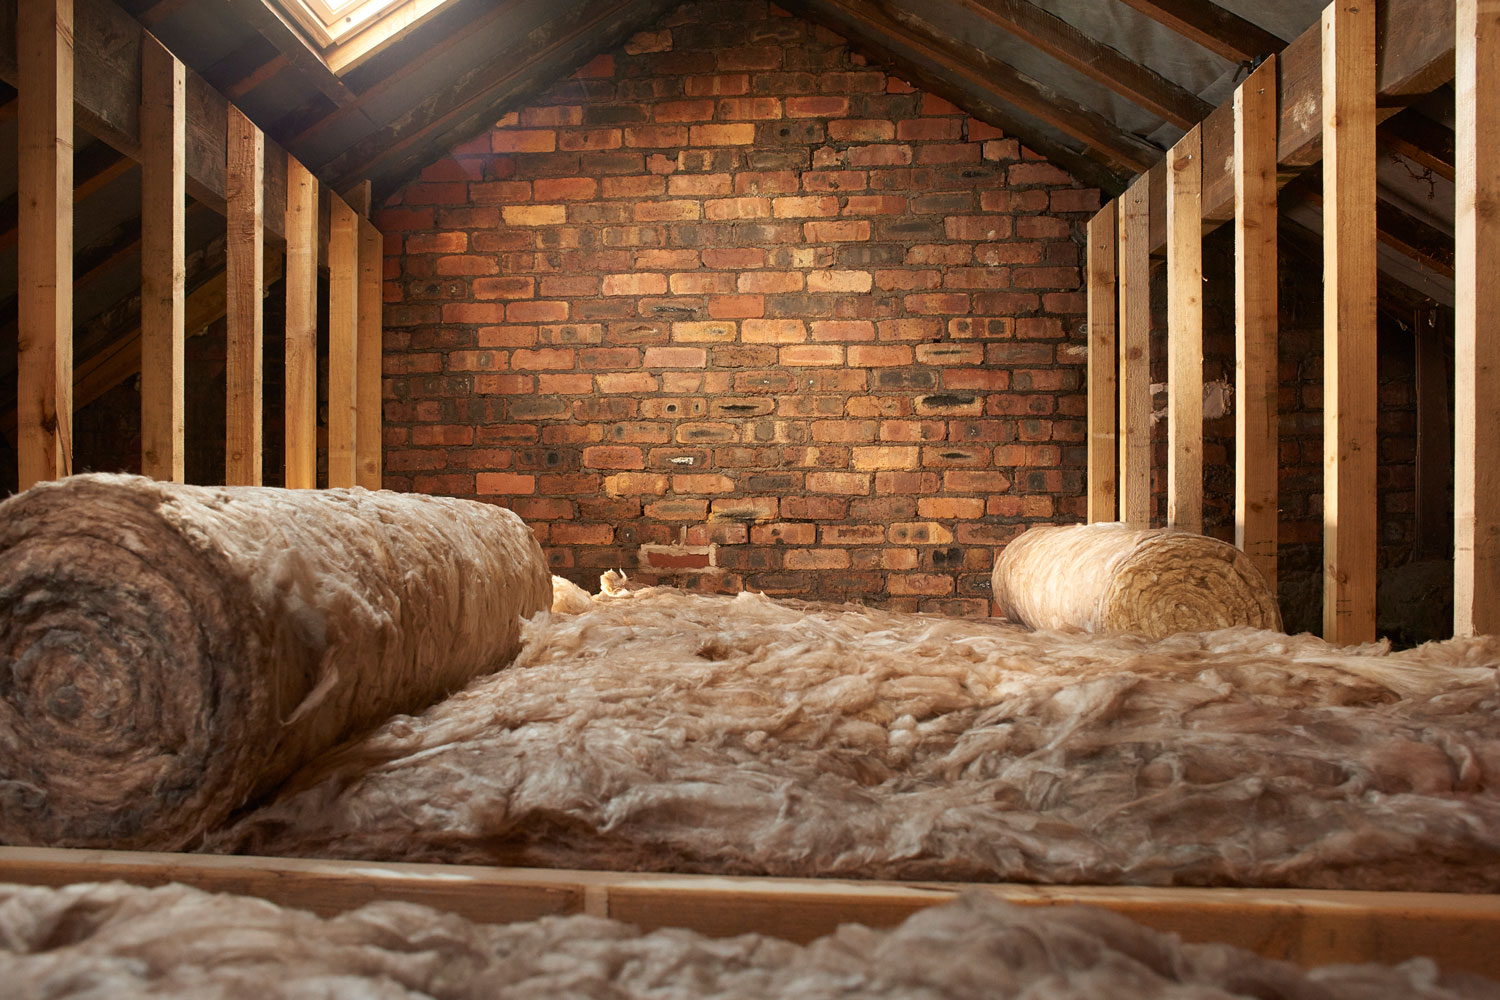 Unrolling wool insulation in the attic